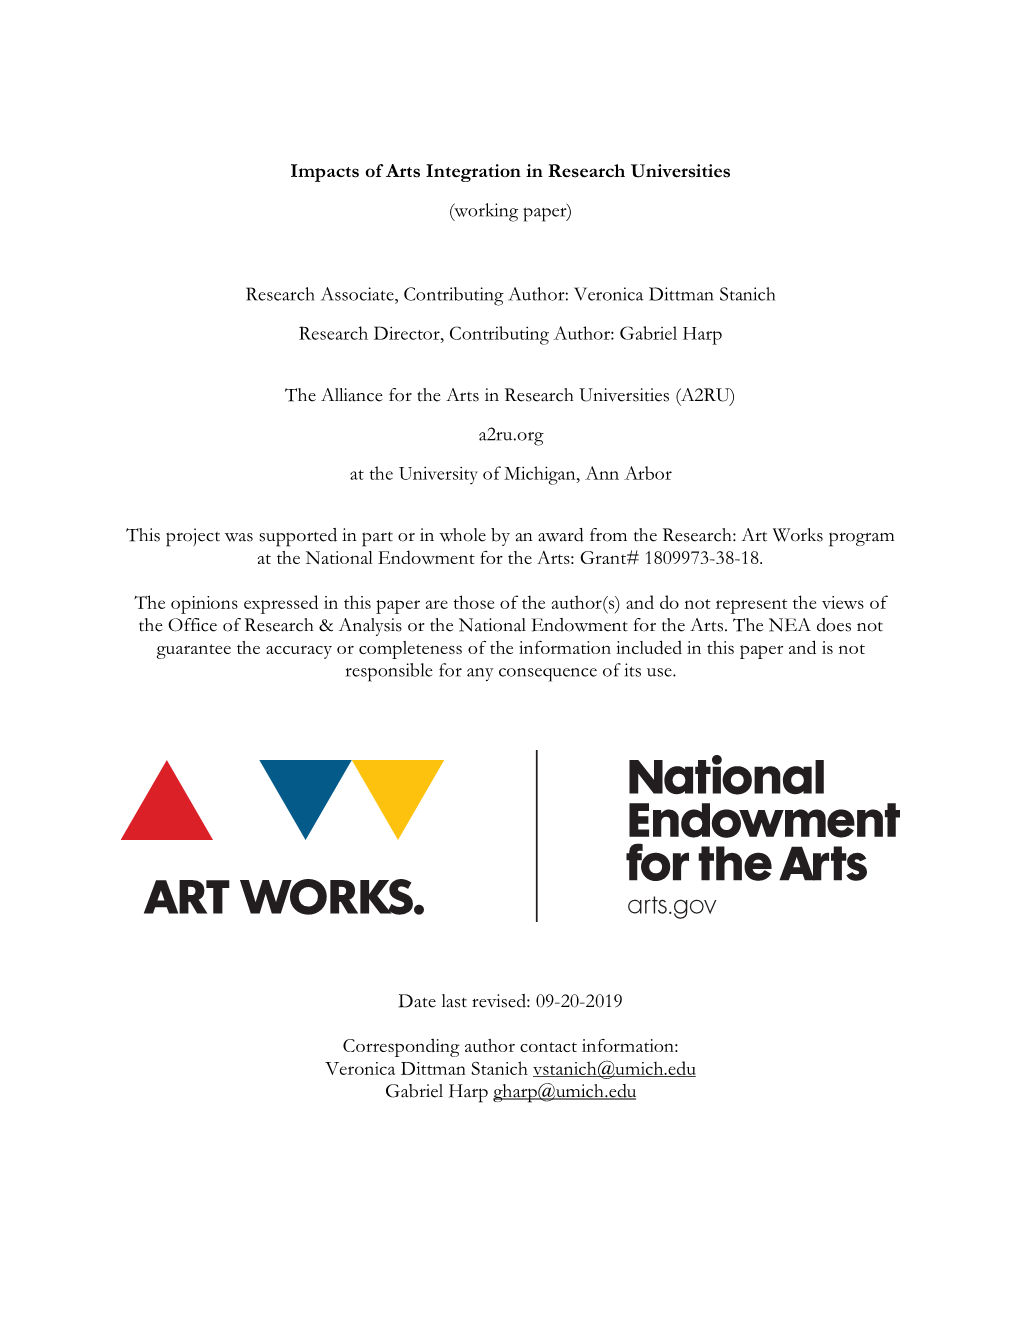 Impacts of Arts Integration in Research Universities (Working Paper)